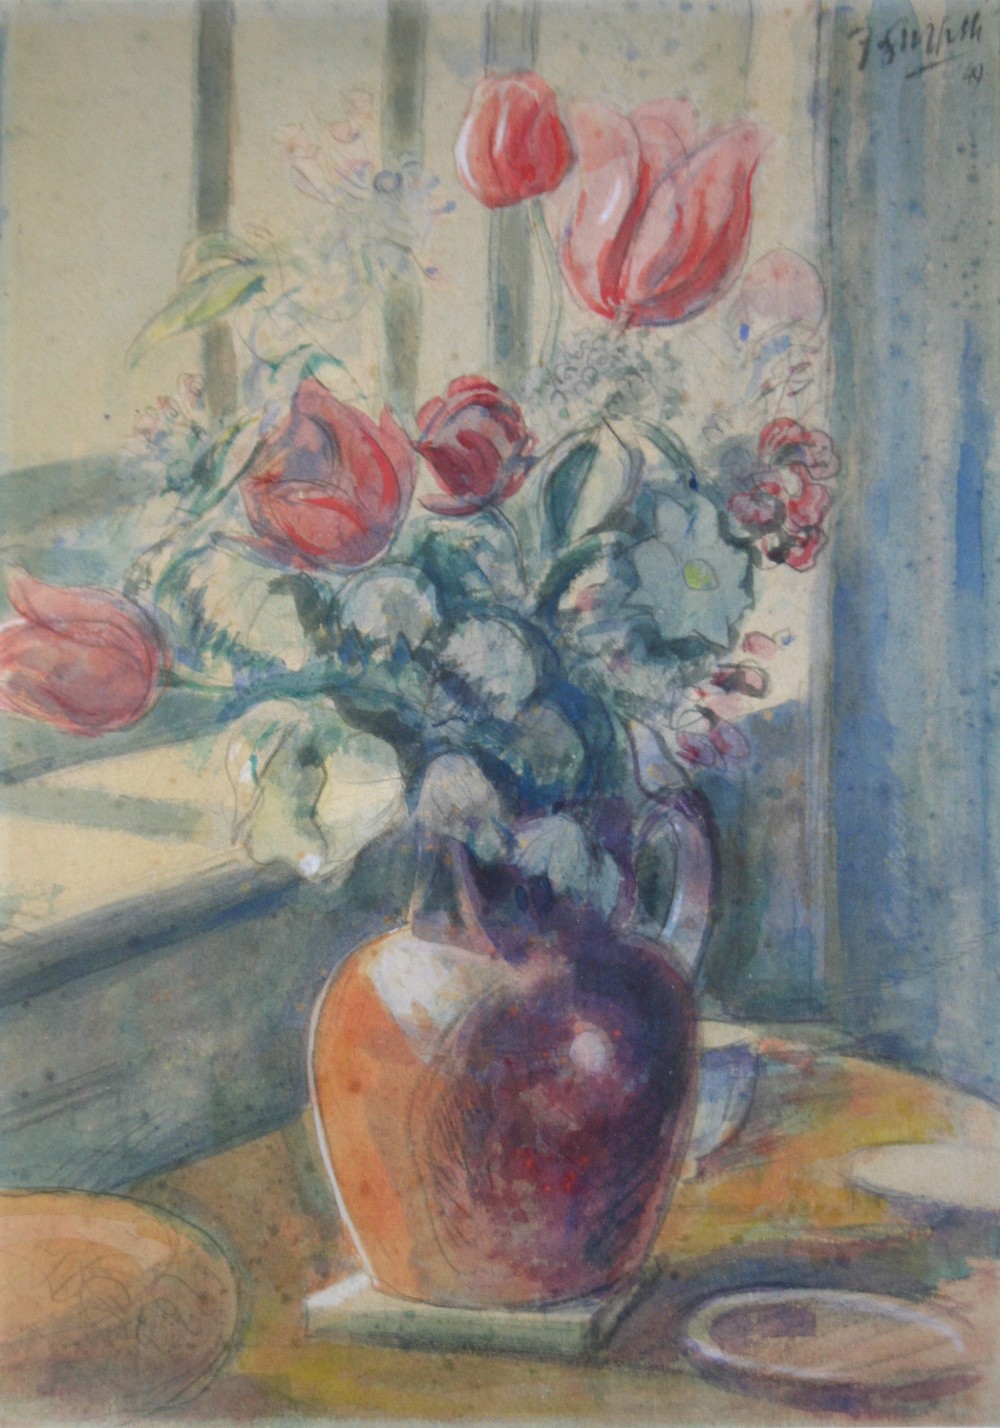 òFRANK GRIFFITH (1889-1979) STILL LIFE Signed and dated 49, watercolour and pencil 43 x 30cm.;